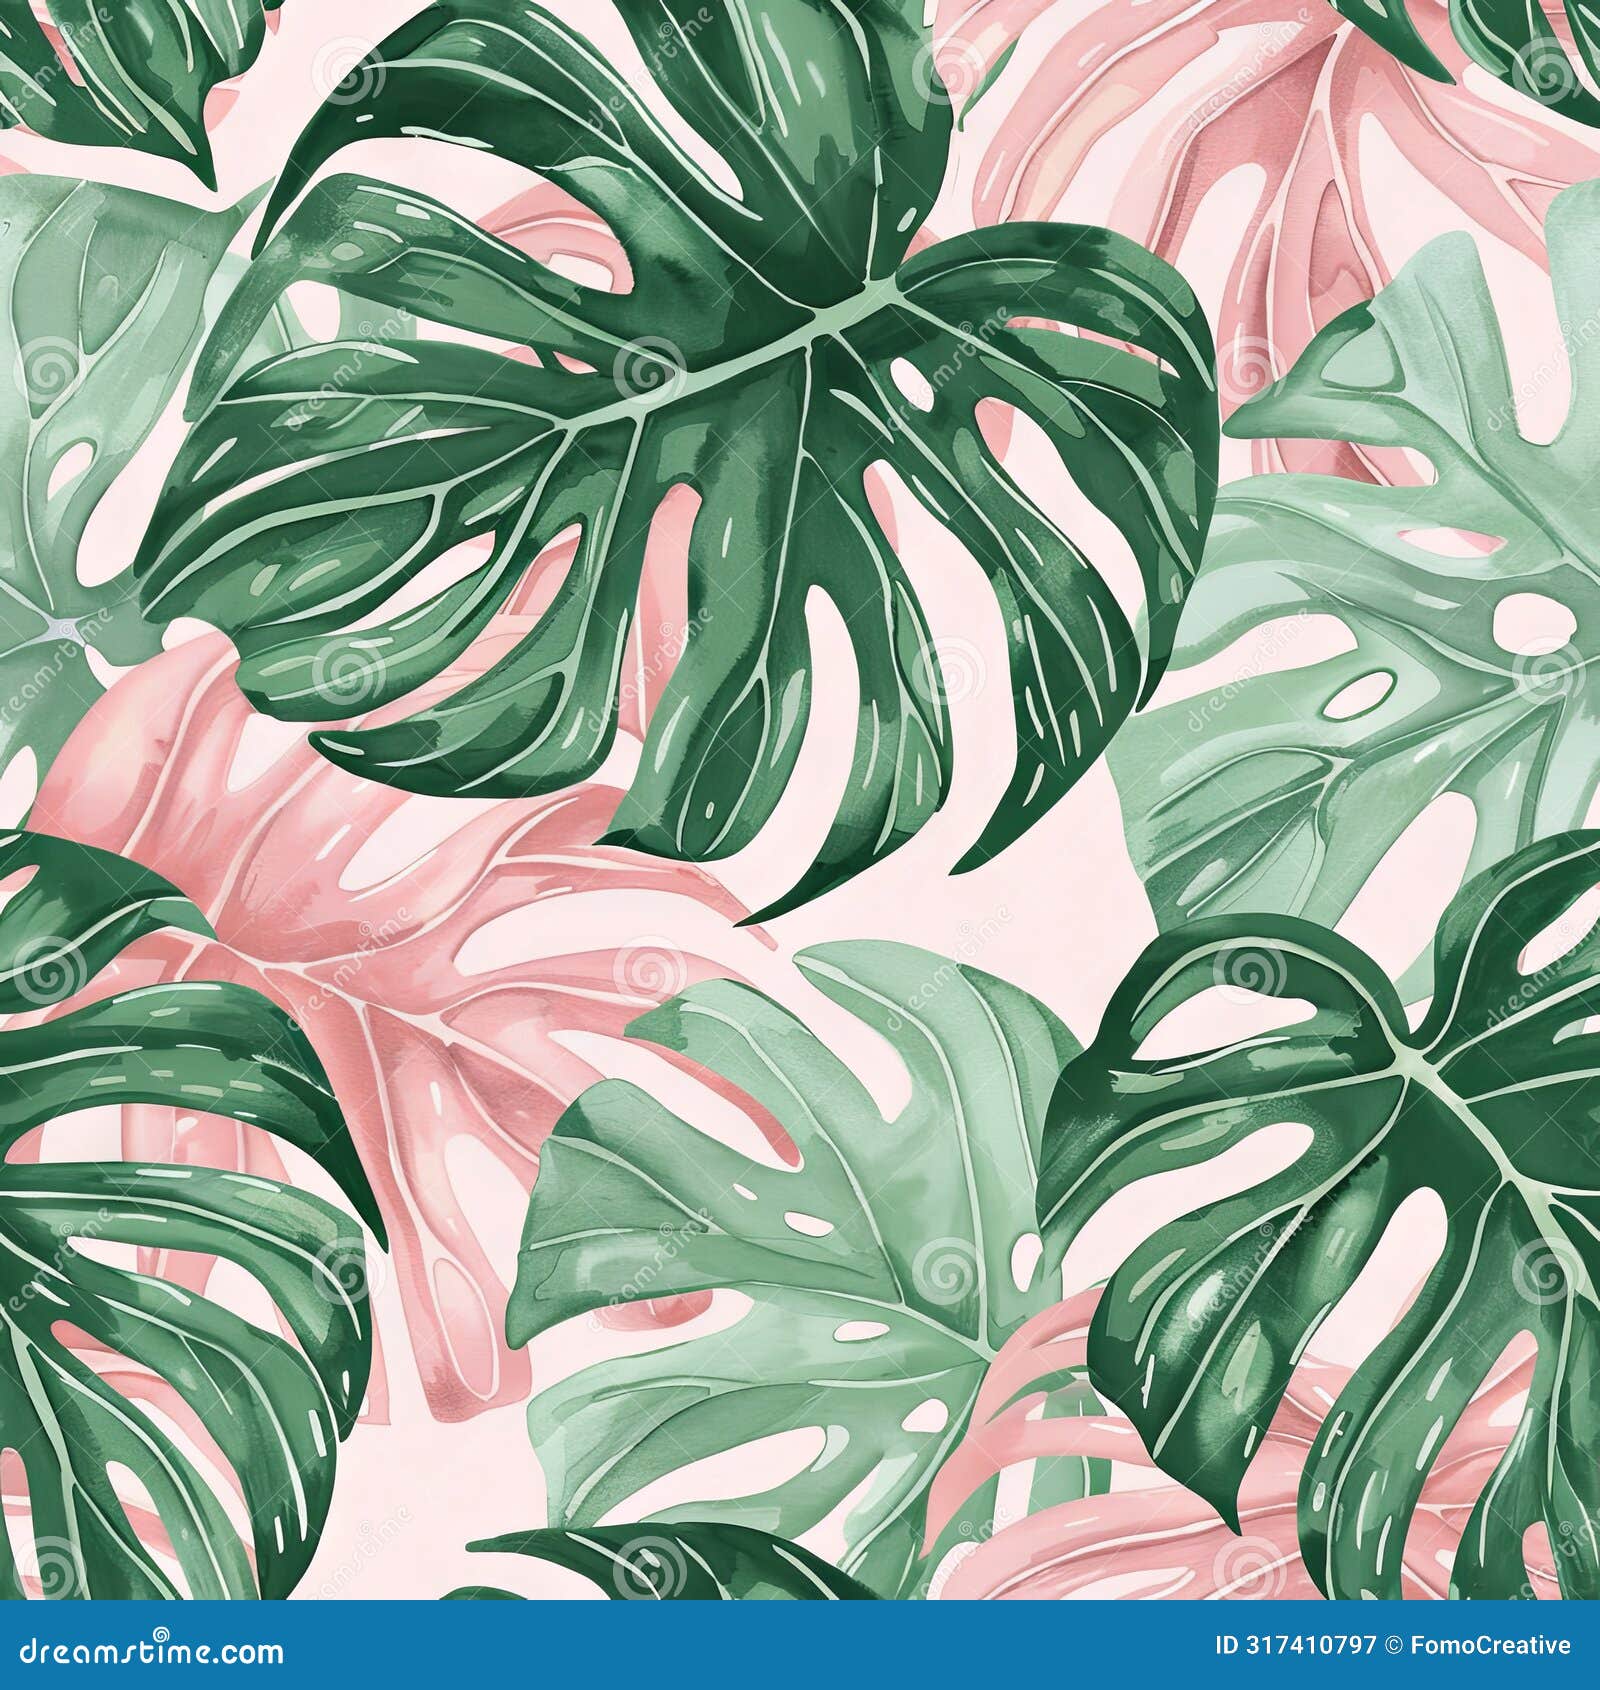 pink and green leaves converge in a vibrant pattern against a serene white background